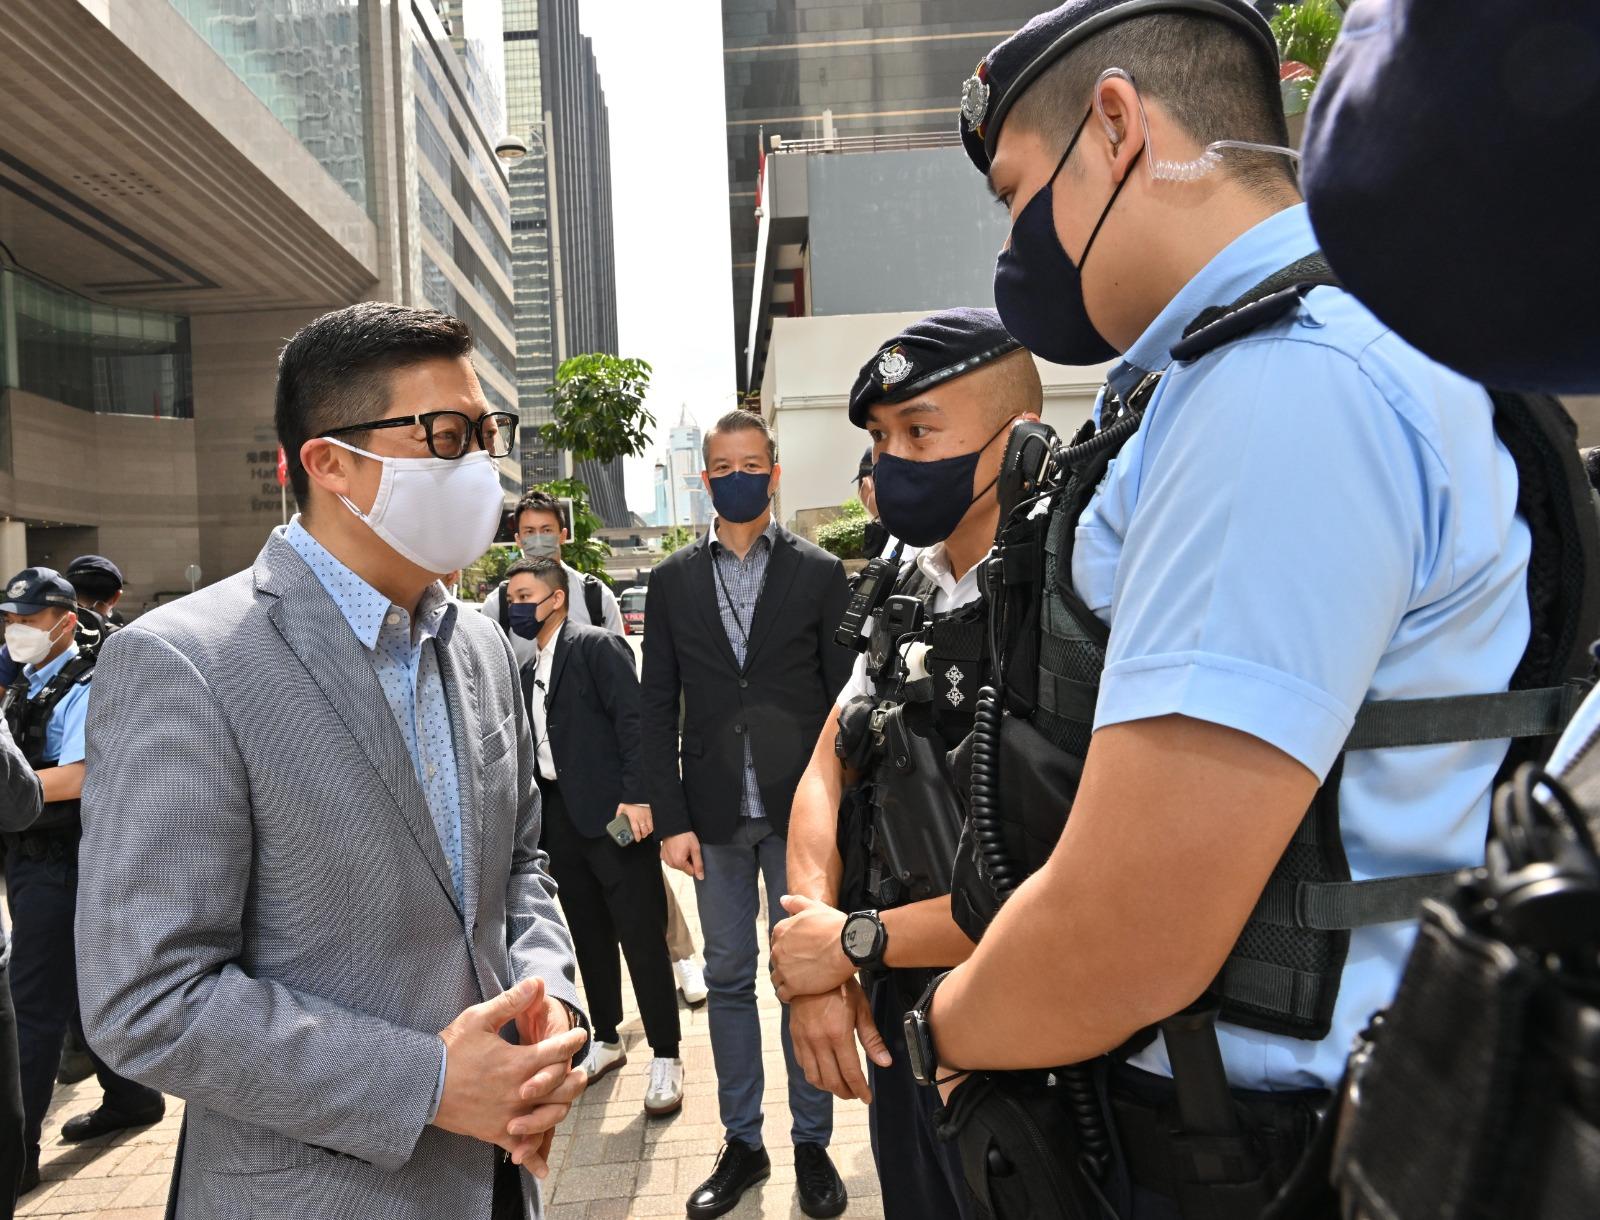 The Secretary for Security, Mr Tang Ping-keung, this morning (May 8) inspected the security arrangements in the vicinity of the Hong Kong Convention and Exhibition Centre (HKCEC) to ensure the 2022 Chief Executive Election be conducted in a safe and orderly manner. Photo shows Mr Tang (second left), accompanied by the Hong Kong Police Force's Regional Commander (Hong Kong Island), Mr Kwok Pak-chung (third right), touring outside the HKCEC and the nearby area and learning about Police’s deployment, security and traffic arrangements on the polling day.